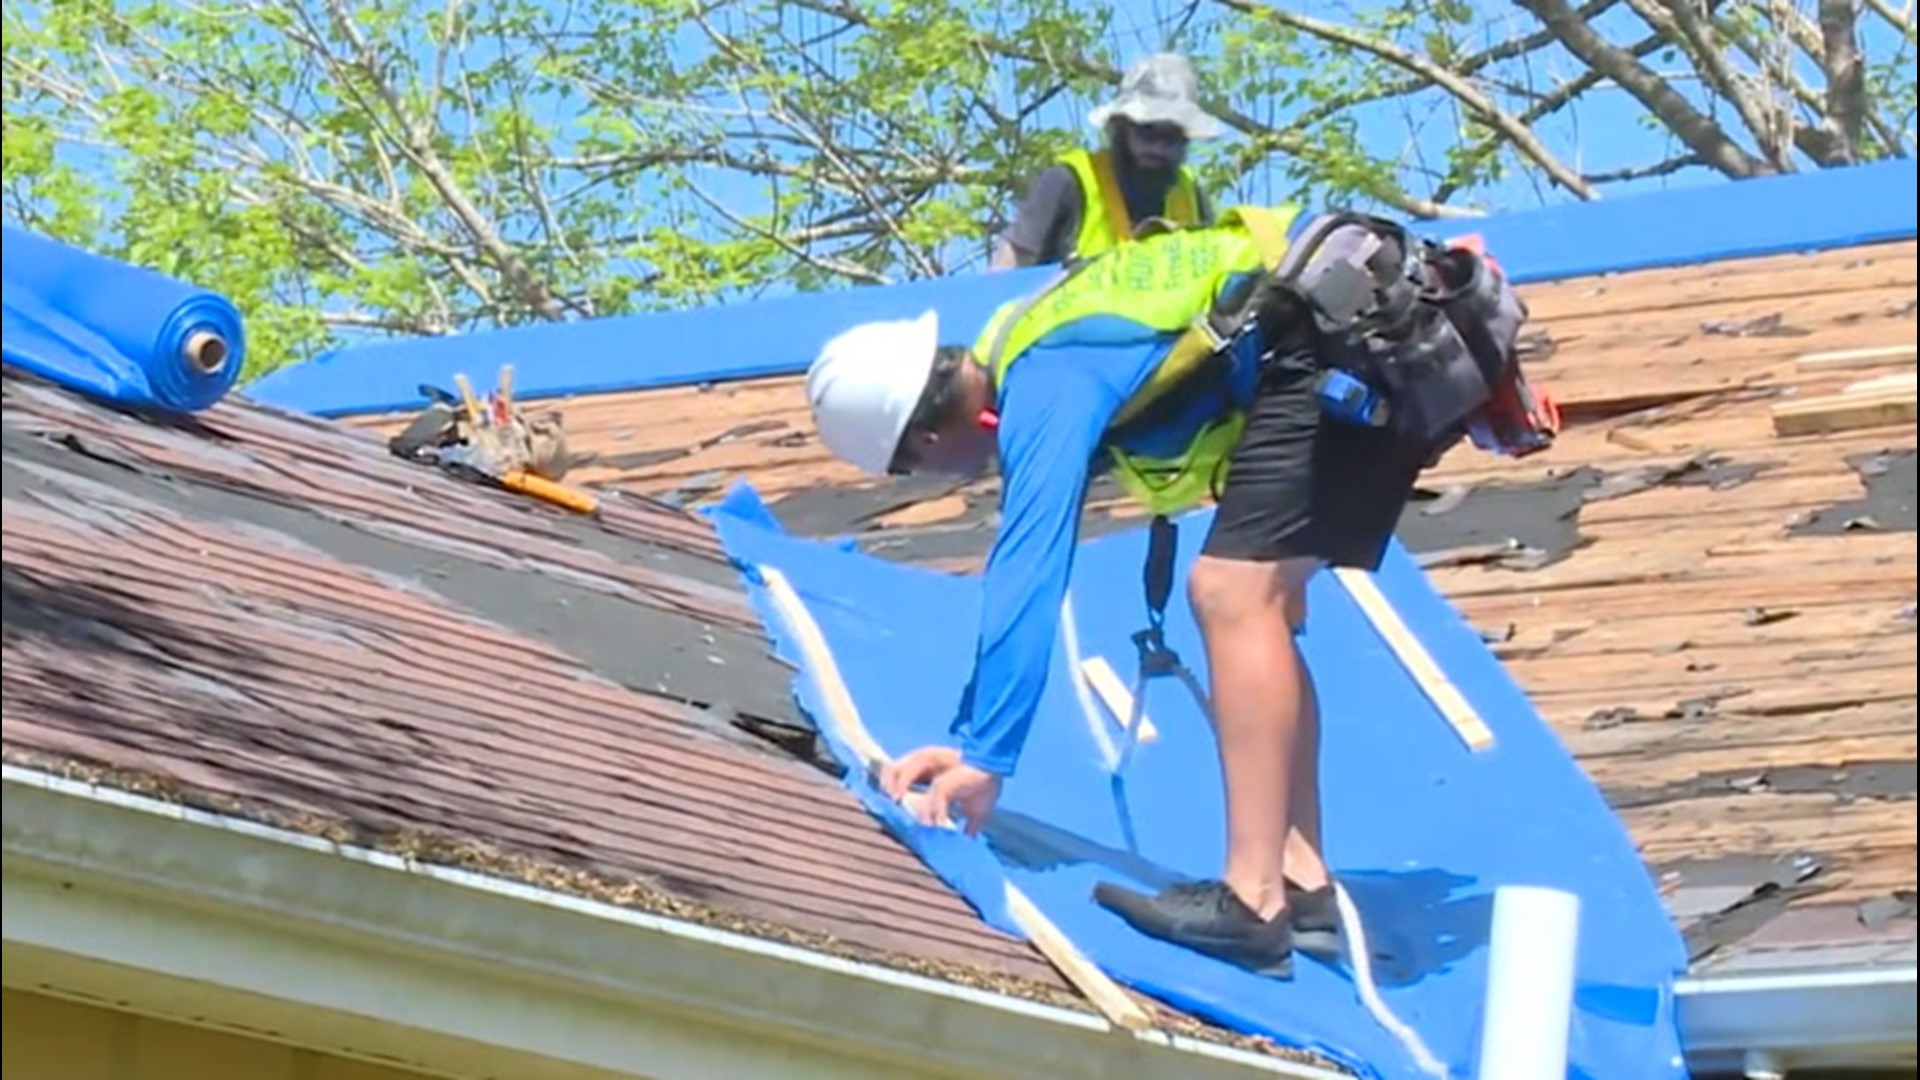 One month after Laura struck Louisiana, homeowners feeling the effects are getting help from the U.S. Army Corps of Engineers' Operation Blue Roof program.